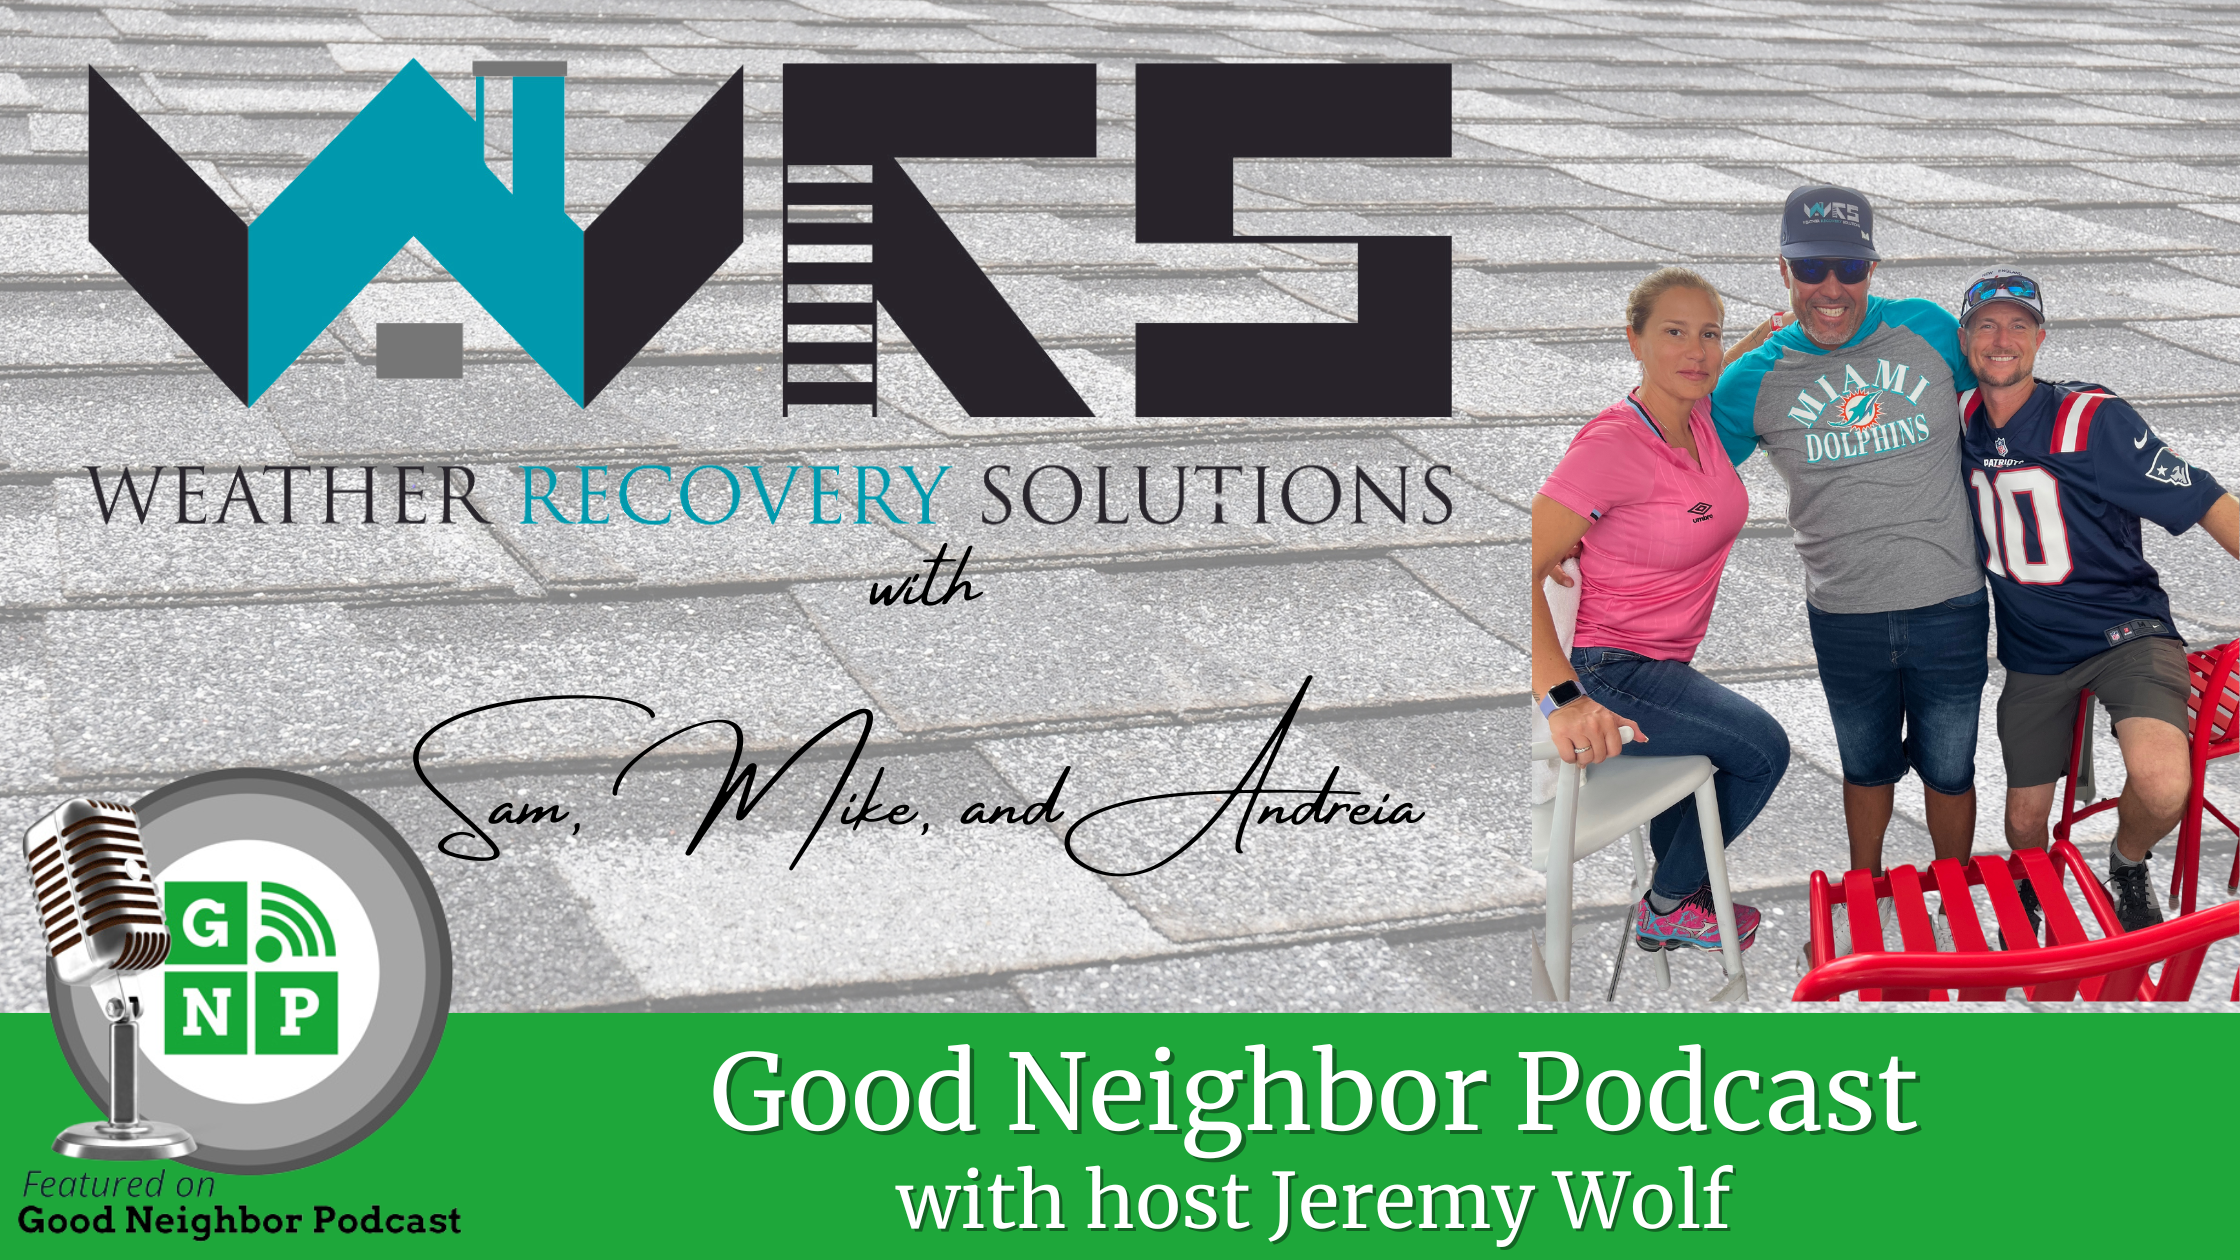 EP #234: Sam, Mike, and Andreia with Weather Recovery Solutions